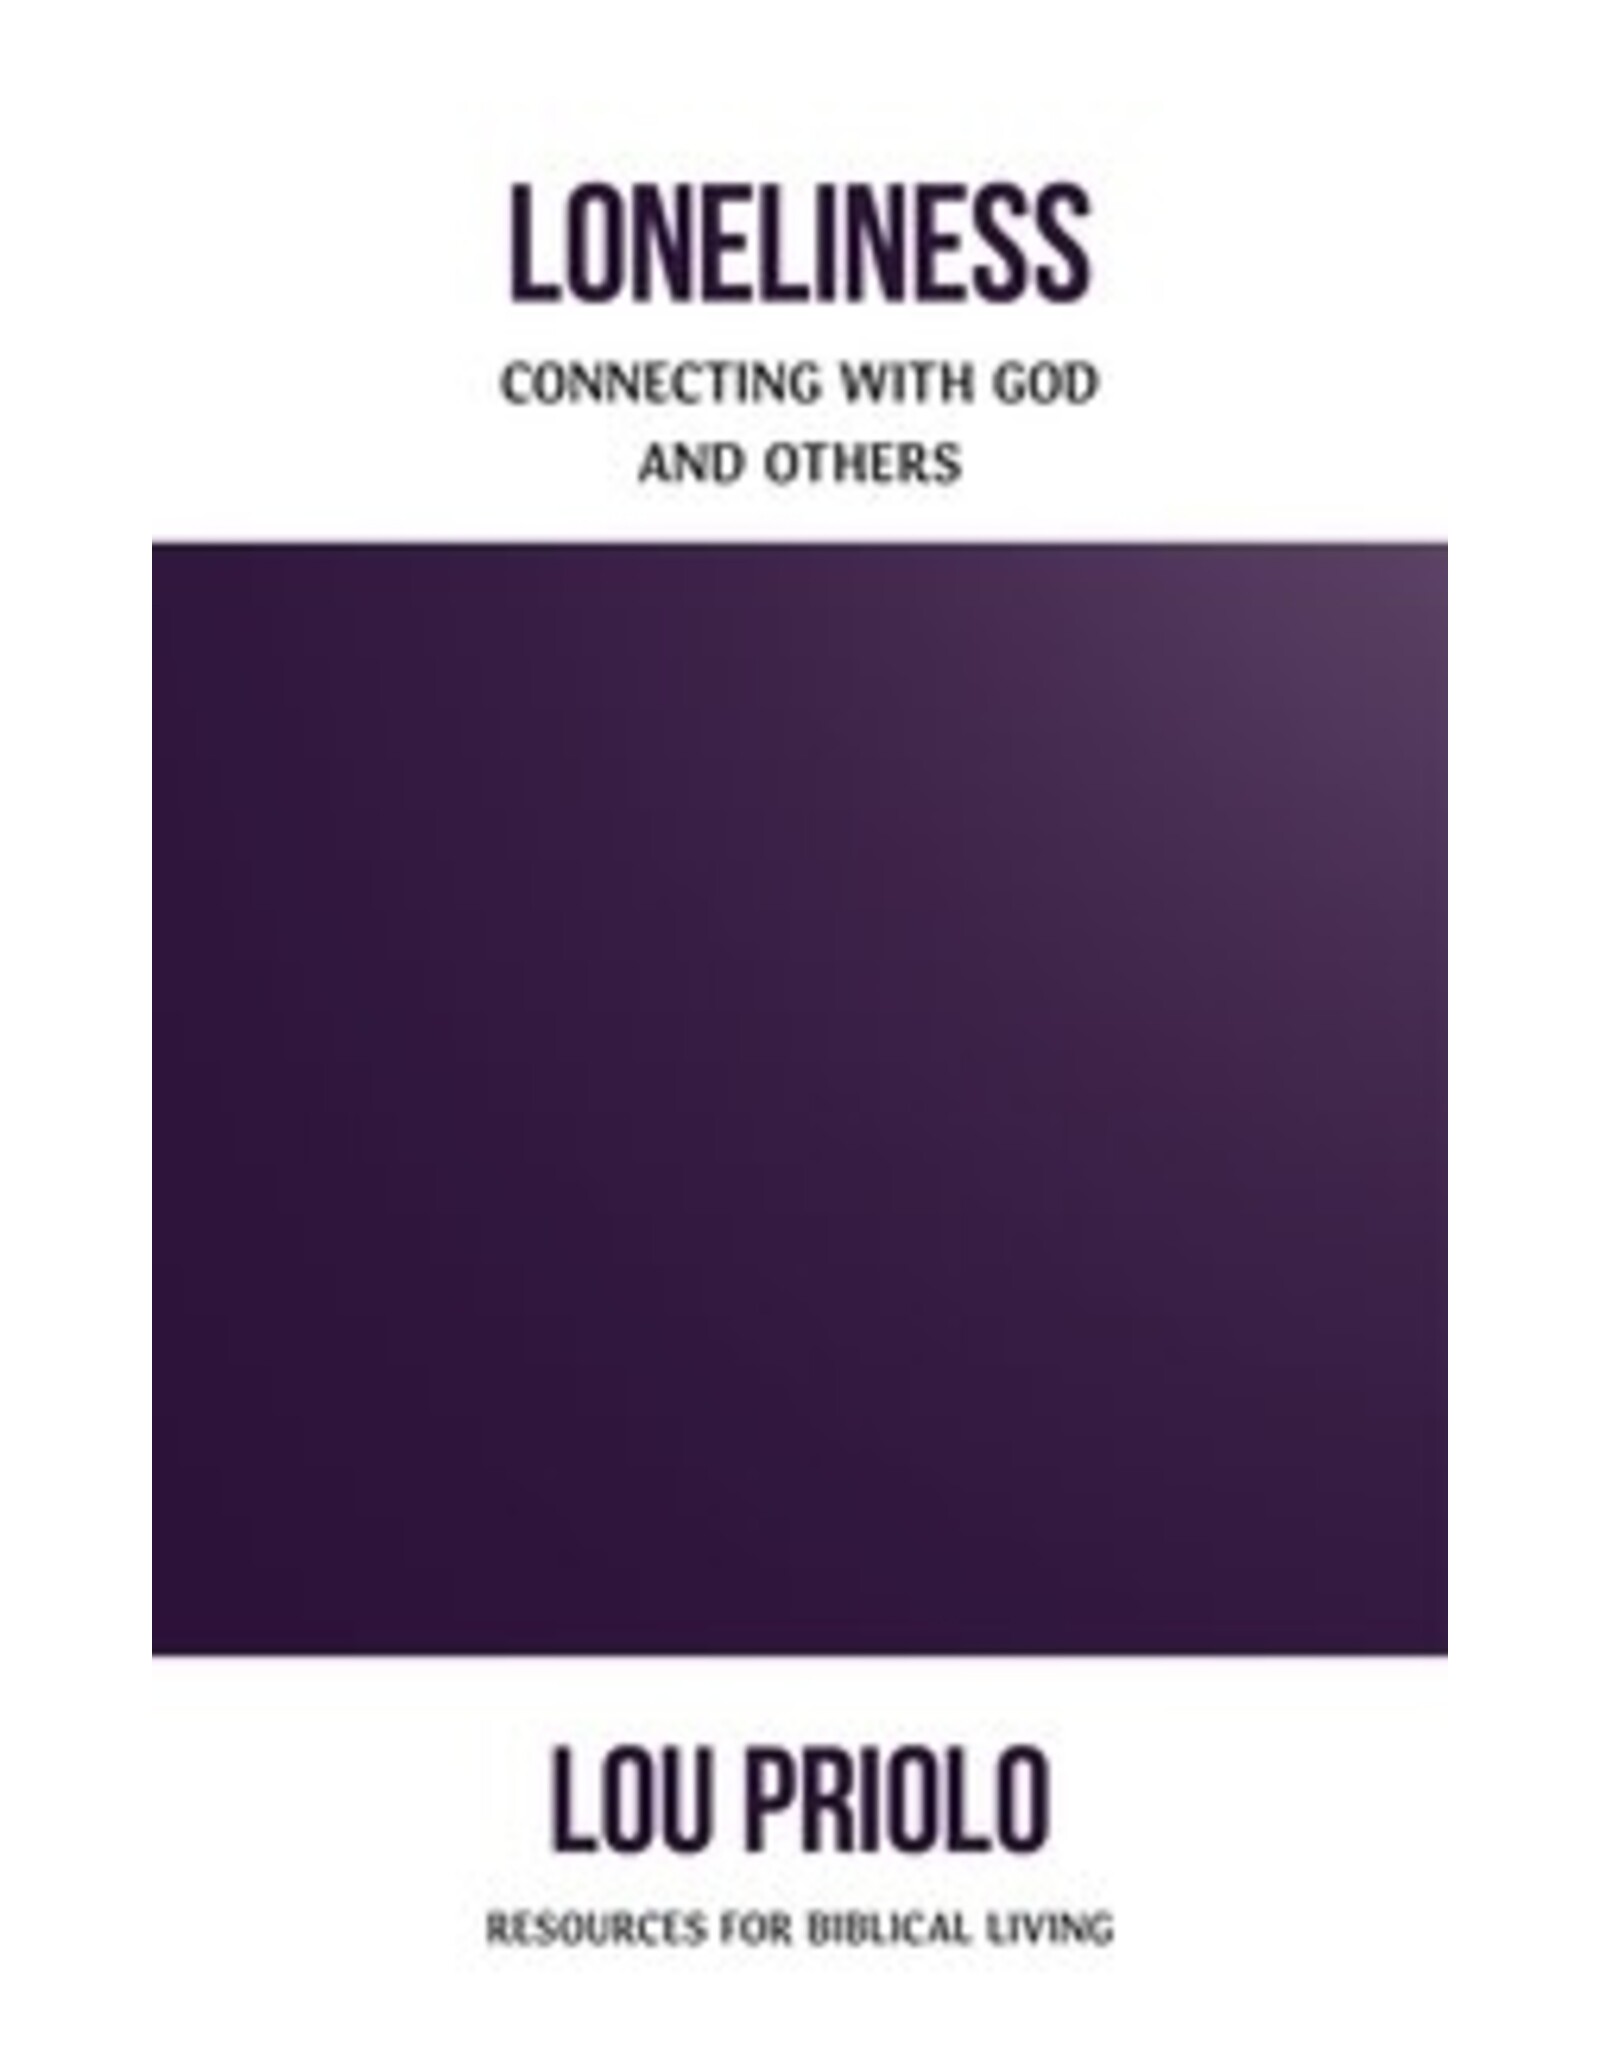 Lou Priolo Loneliness - Connecting with God and Others